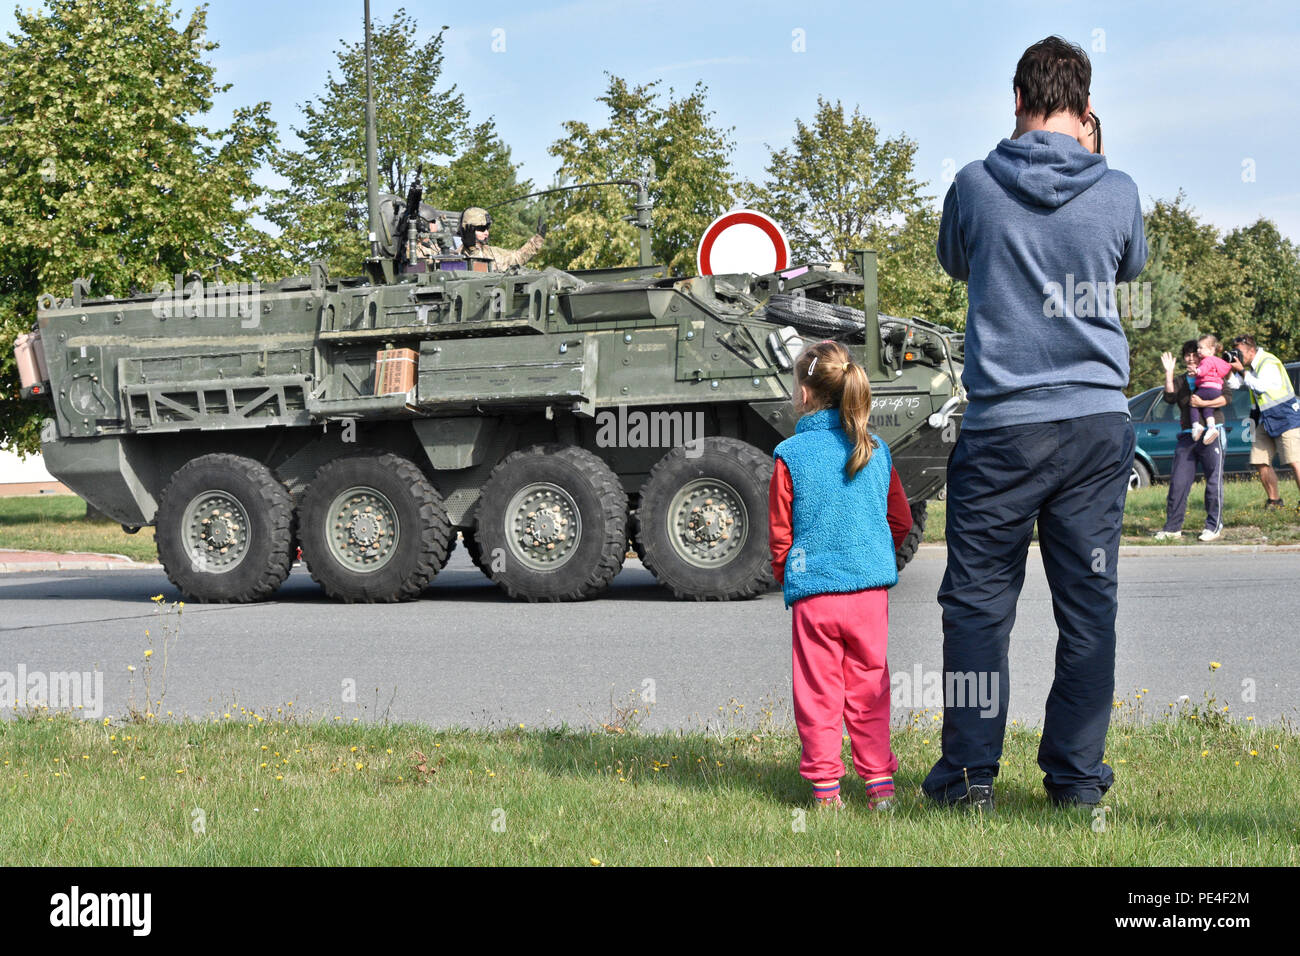 Families local to the Czech Republic wave as they cheer on Troopers assigned to 4th Squadron, 2nd Cavalry Regiment, while watching them participate in Dragoon Crossing, a tactical road march starting out at Rose Barracks, Germany and continuing through the Czech Republic and the Slovak Republic ending in Hungary Sept. 13, 2015. The purpose of the exercise is to reassure NATO allies of the U.S. intent during Operation Atlantic Resolve while demonstrating interoperability and freedom of movement throughout Eastern Europe. (U.S. Army photo by Sgt. William A. Tanner/released) Stock Photo